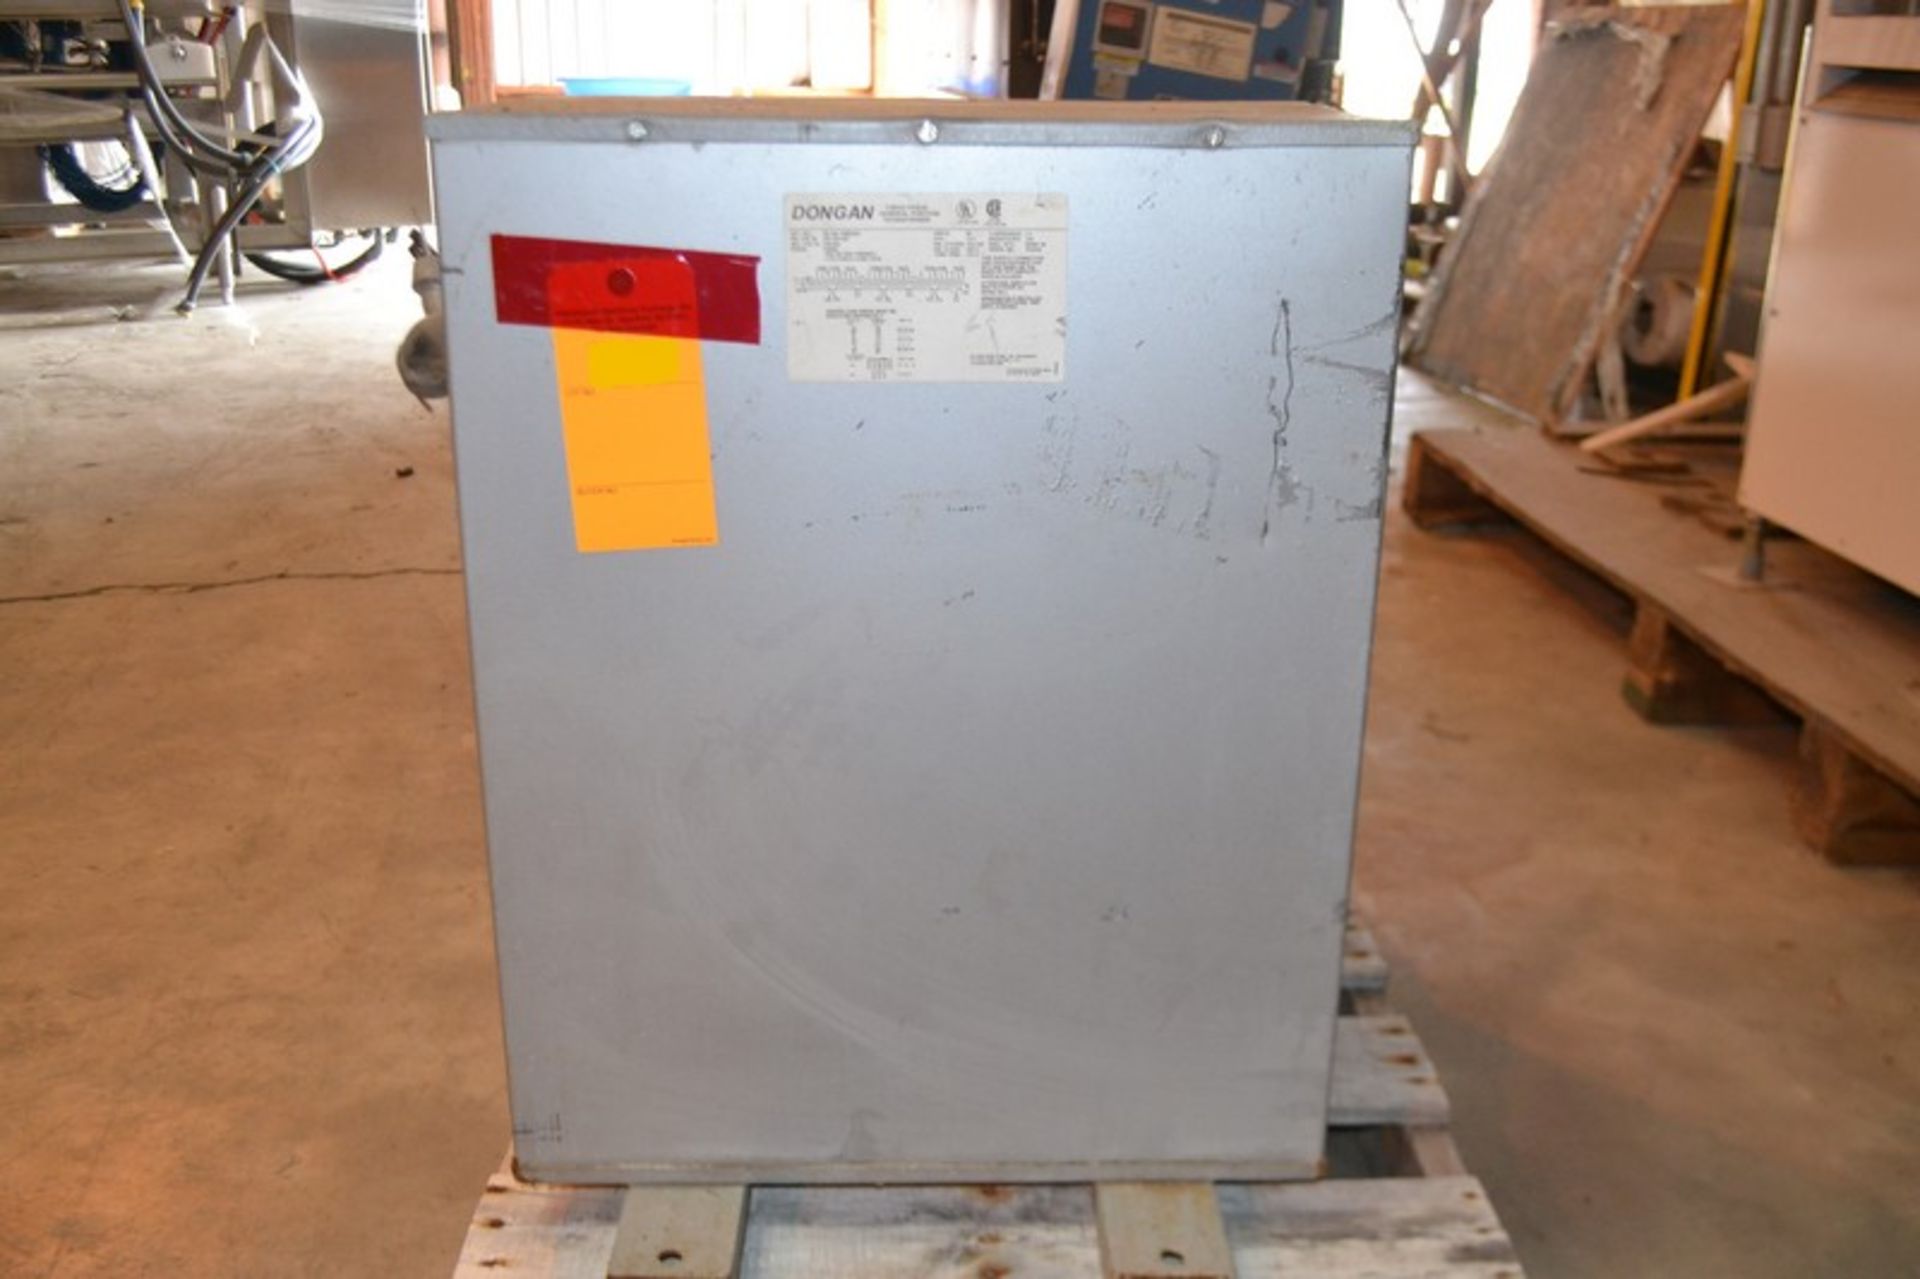 Transformer MFG By Dongan 24 KVA 60 HZ 230/460 Volts 21"L X 12"W X 26"H. Required Loading Fee For